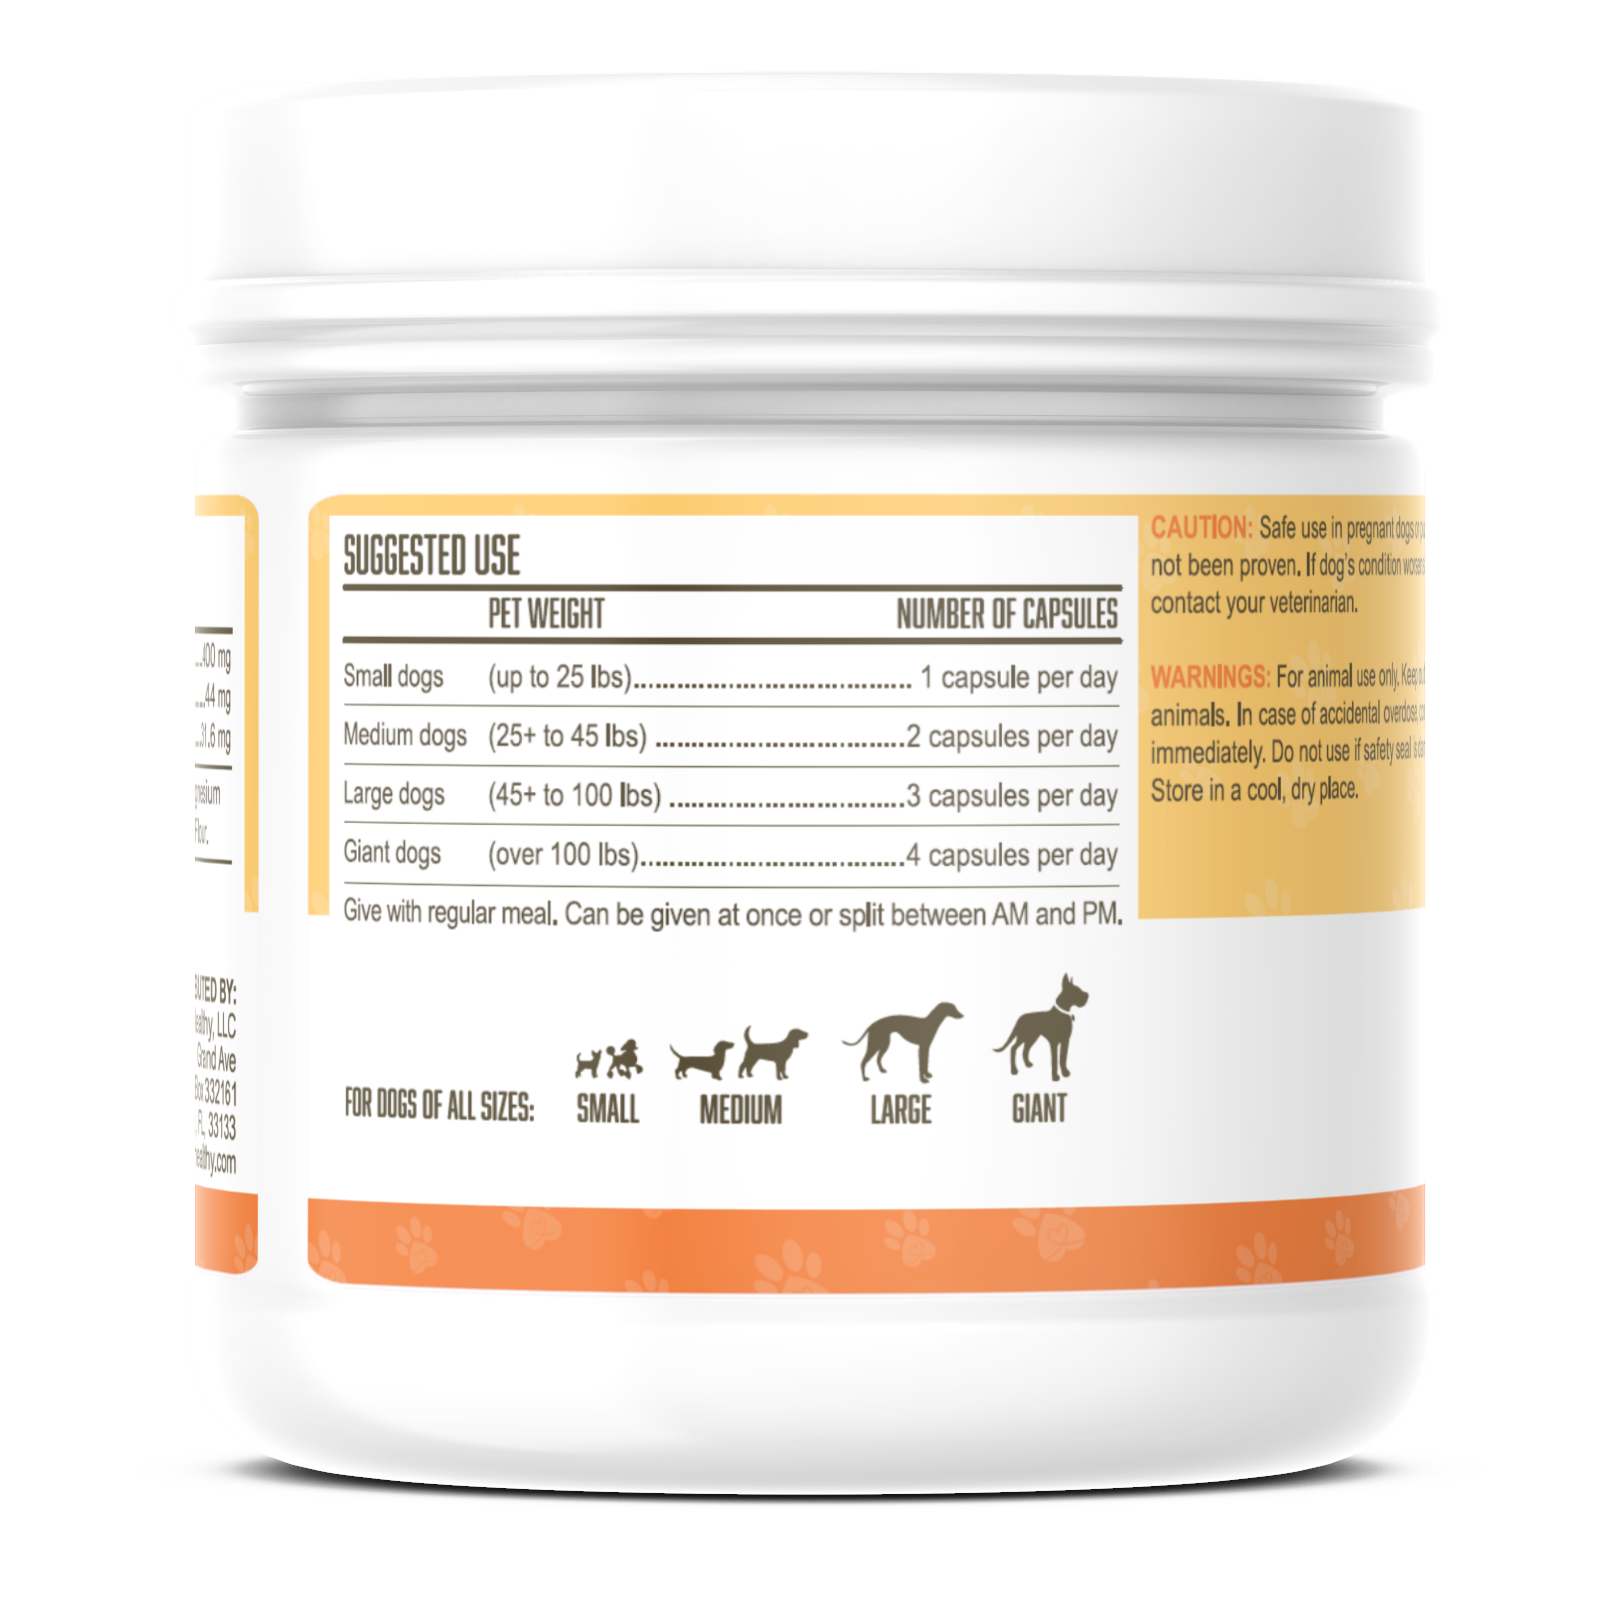 Suggested dosage by dog's weight for omega-3 dog supplement